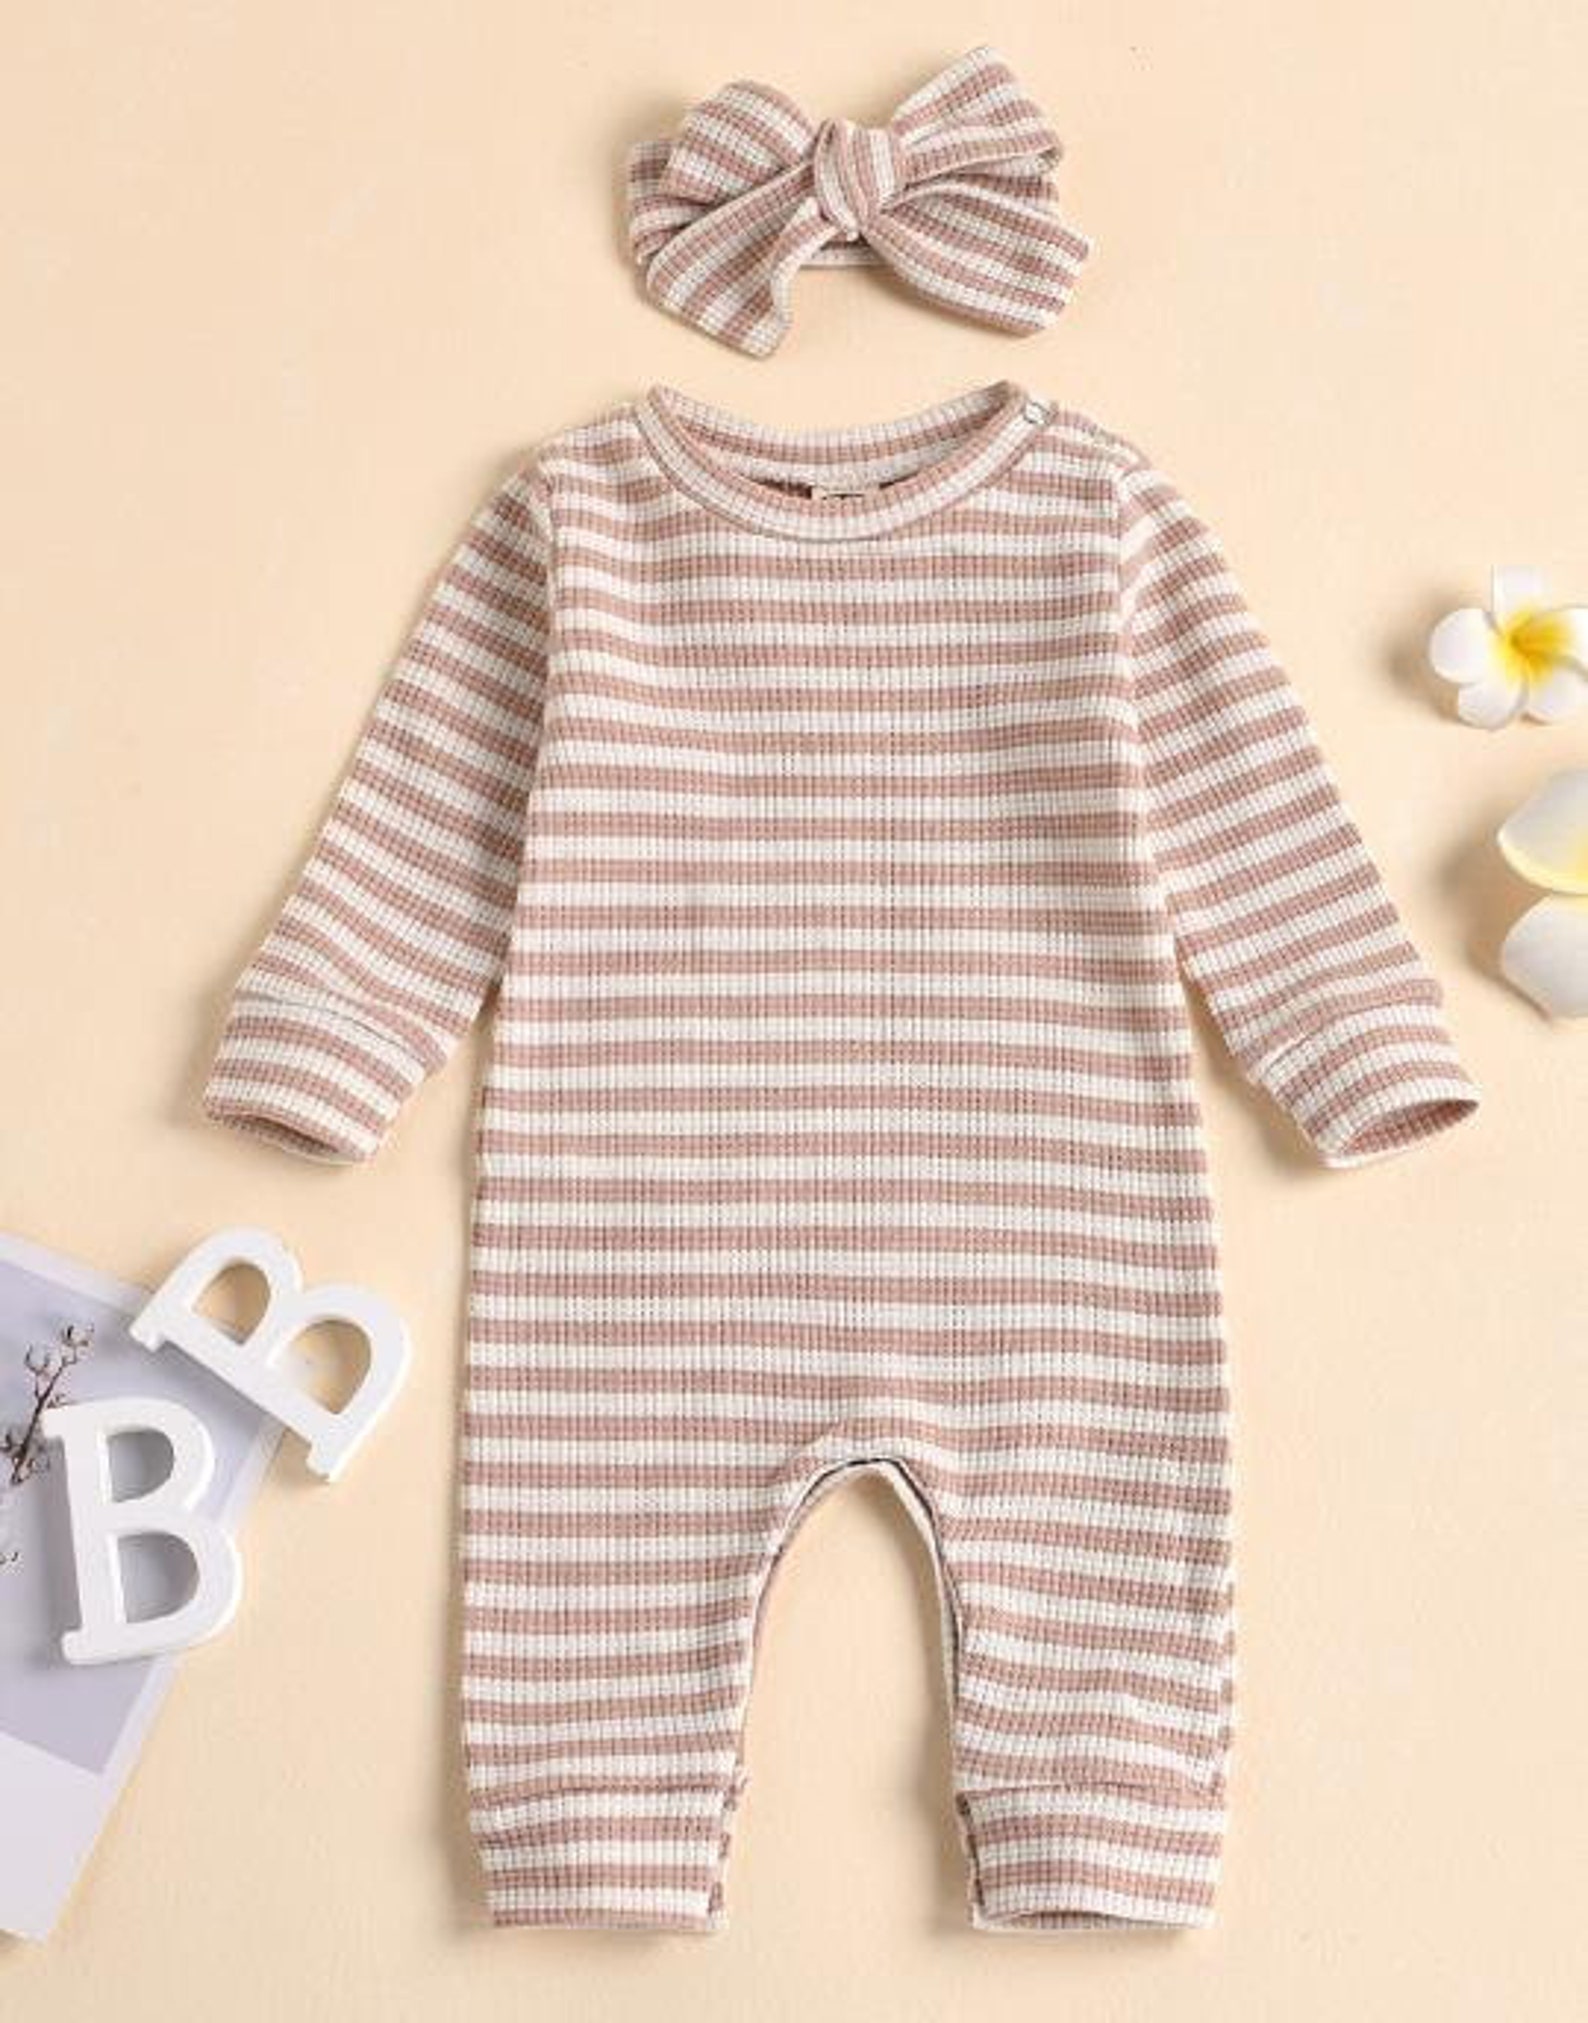 Ribbed Striped Romper Baby Gender Neutral Romper Bow Baby | Etsy